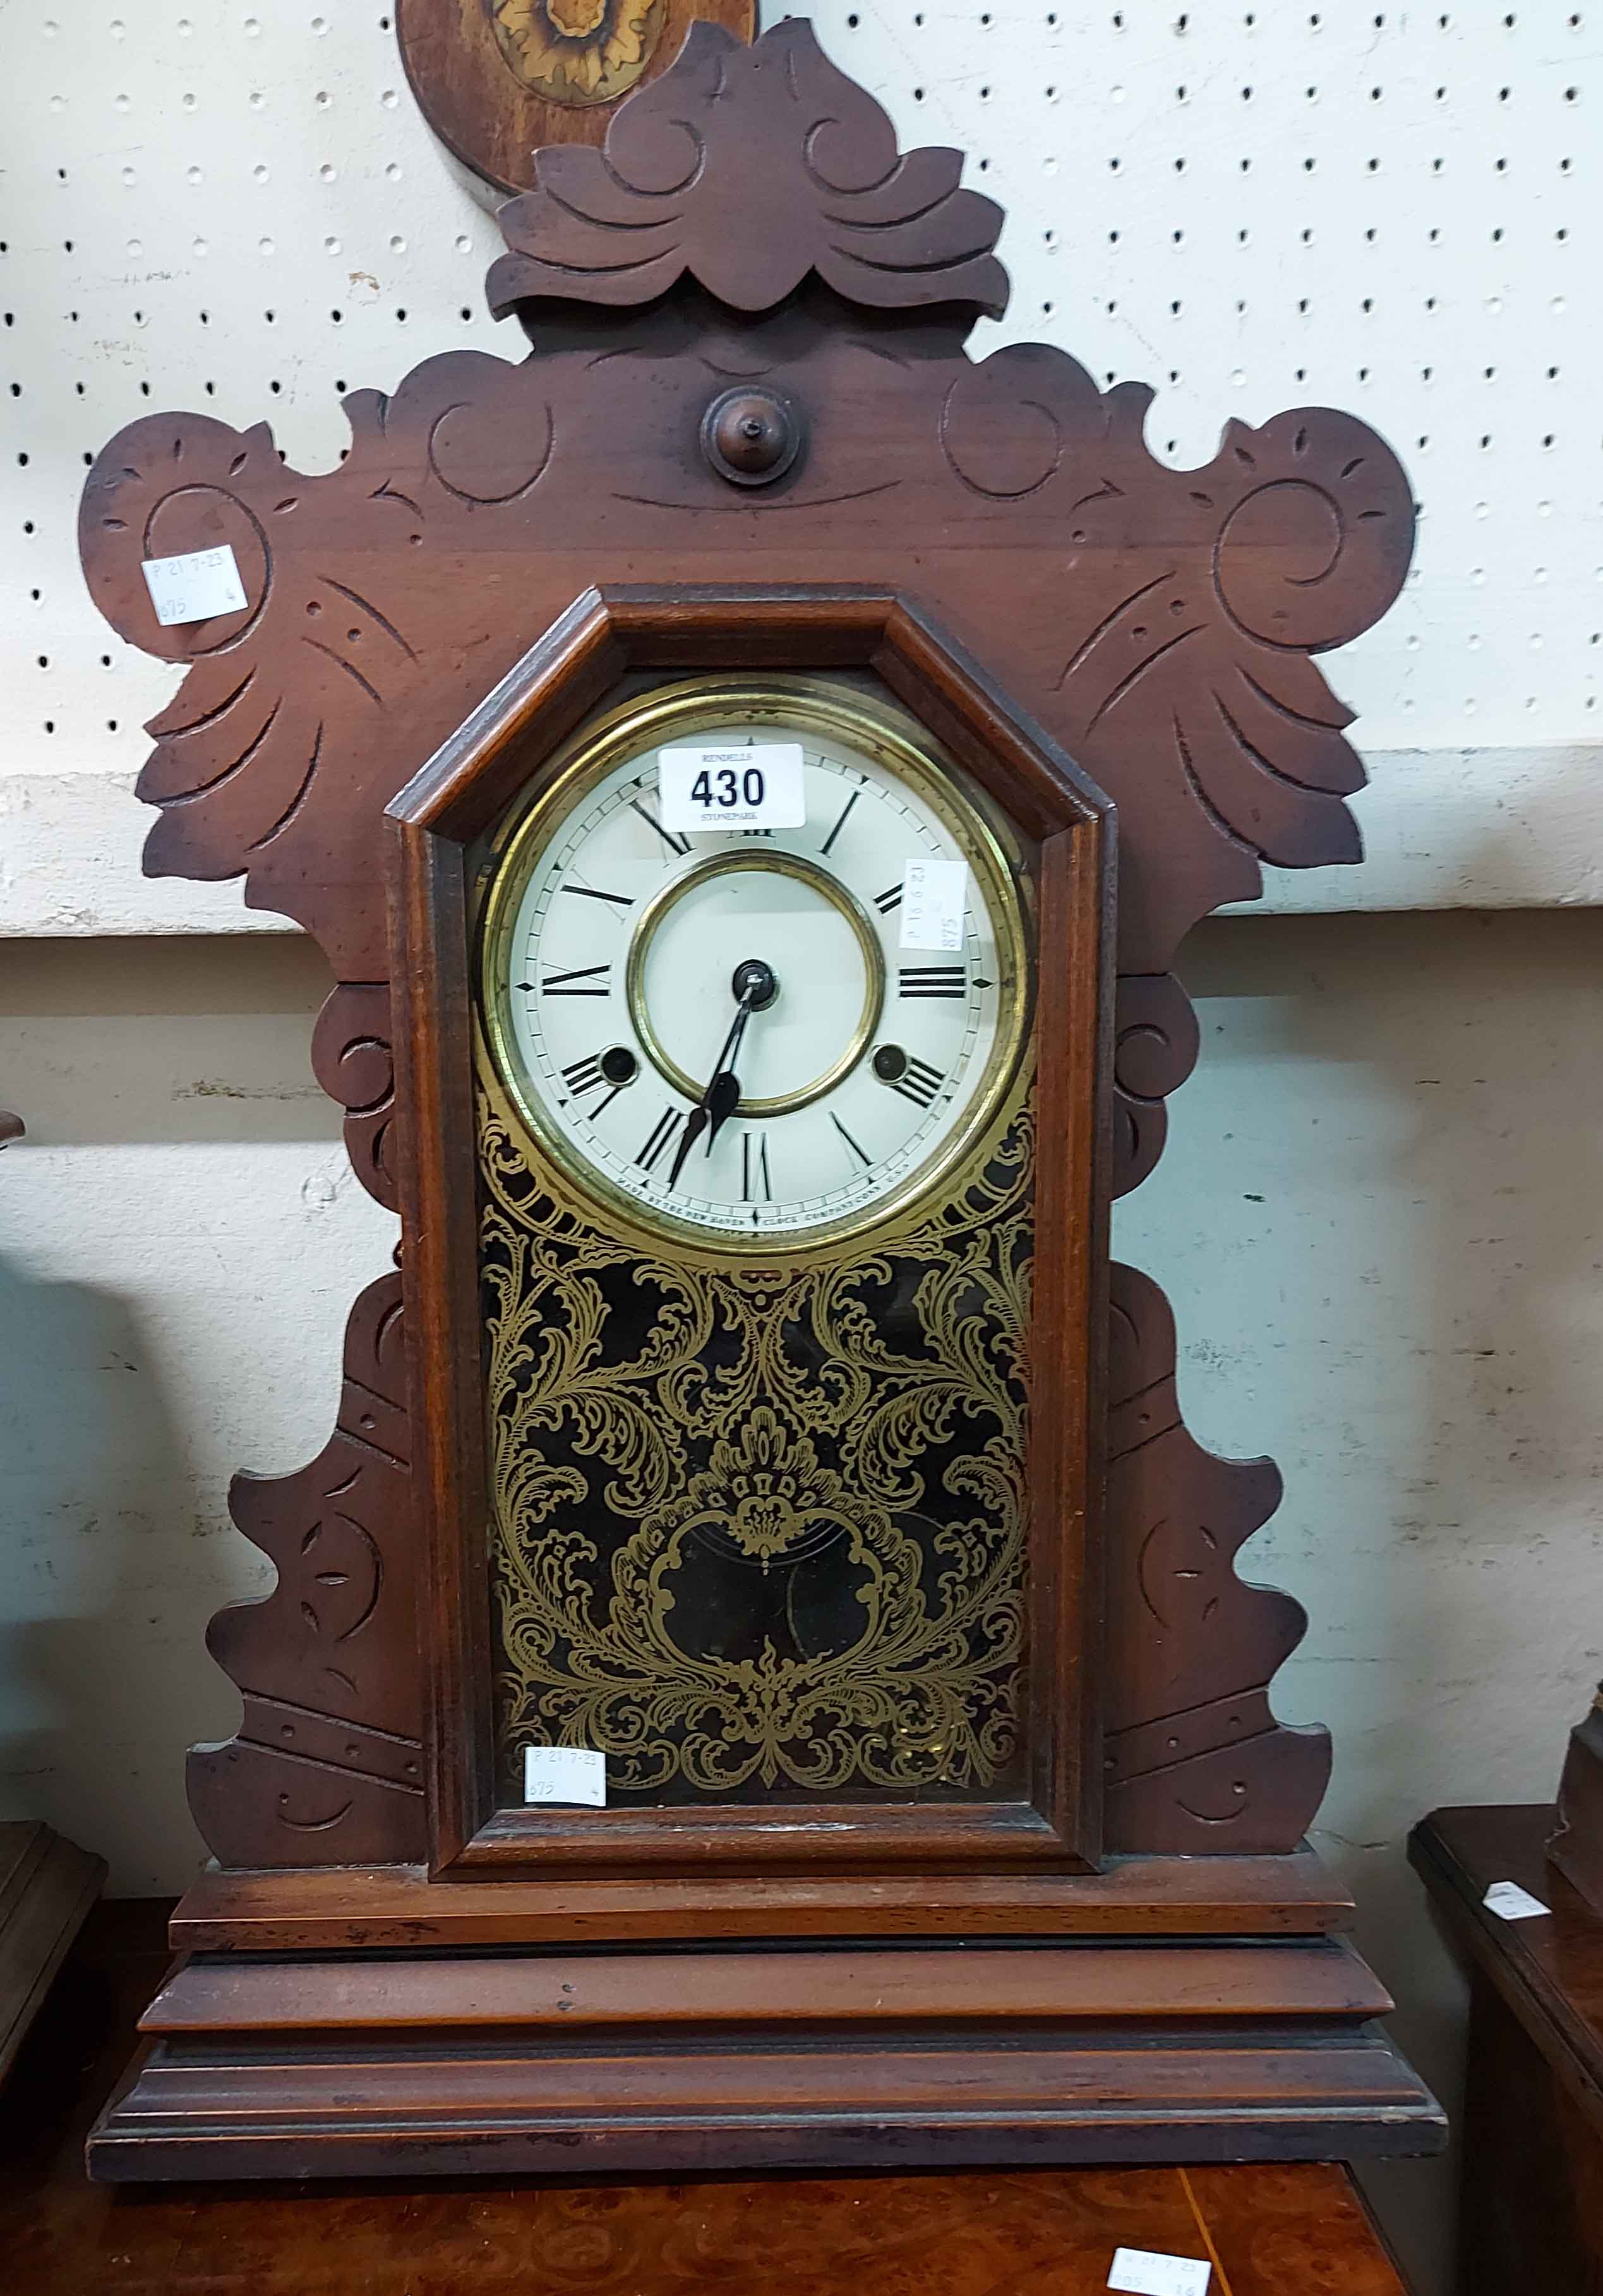 An American stained wood cased 'gingerbread' shelf clock with decorative glazed panel door and New